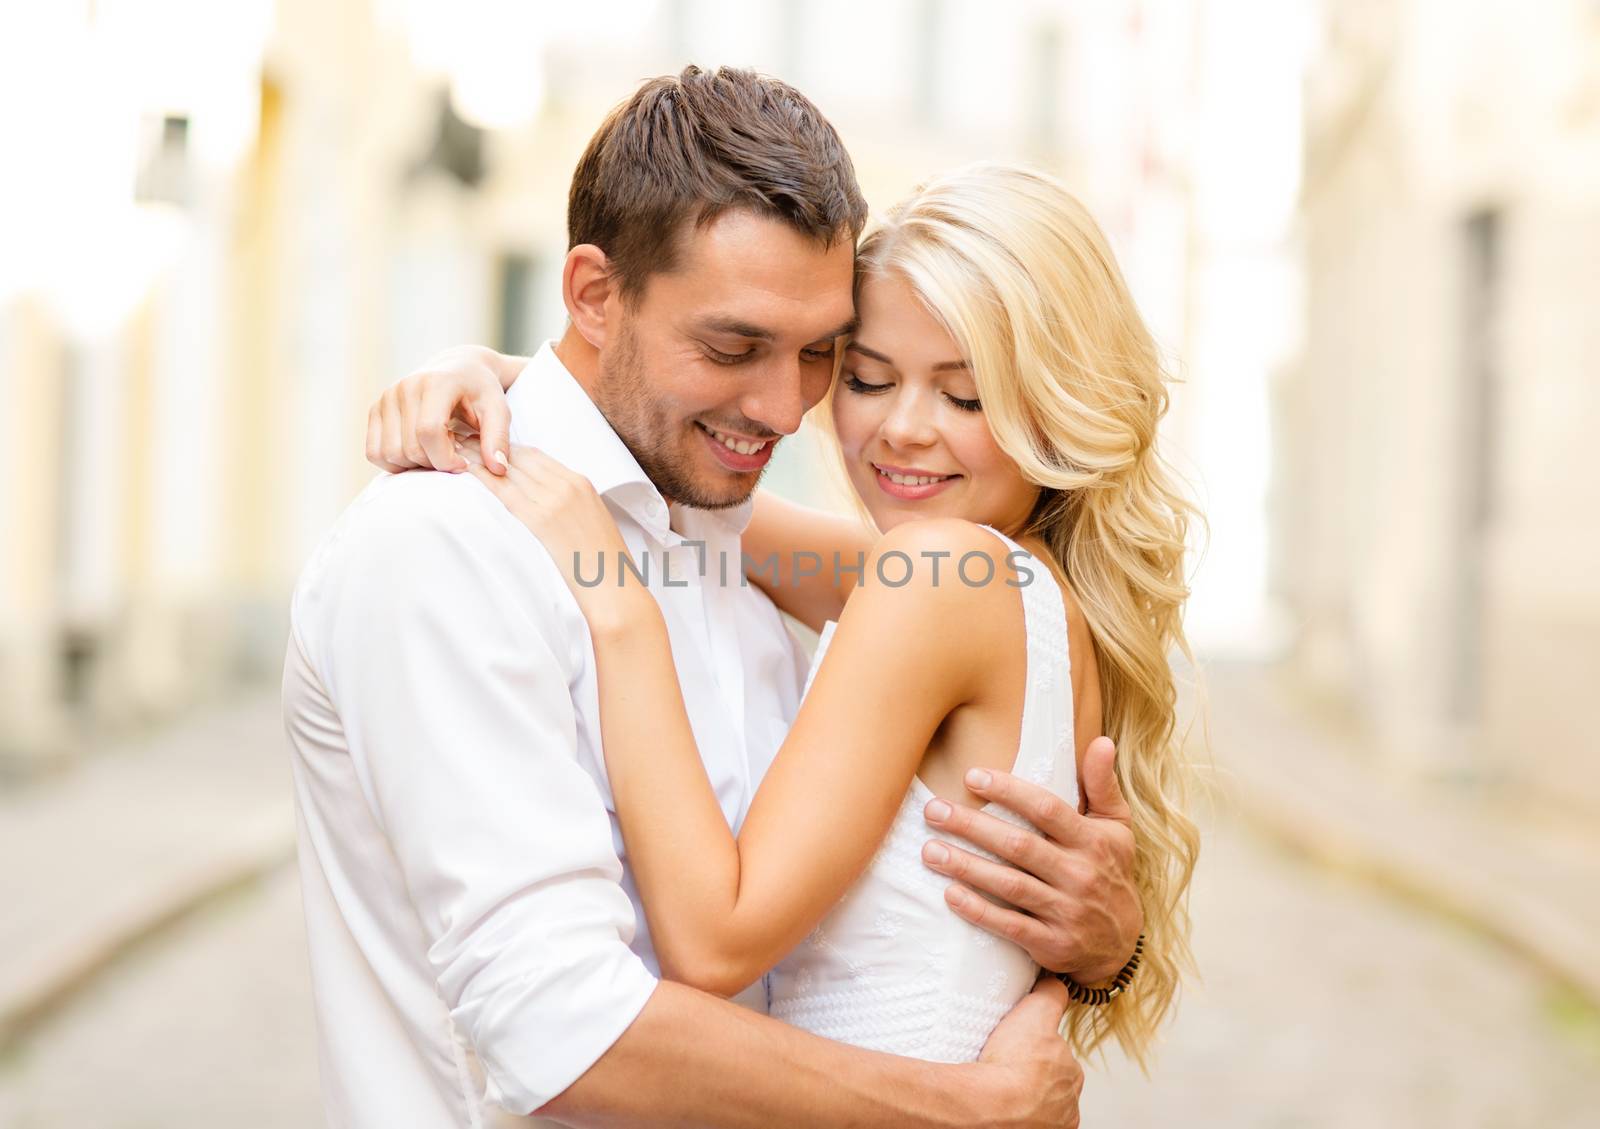 summer holidays, love, travel, tourism, relationship and dating concept - romantic happy couple hugging in the street